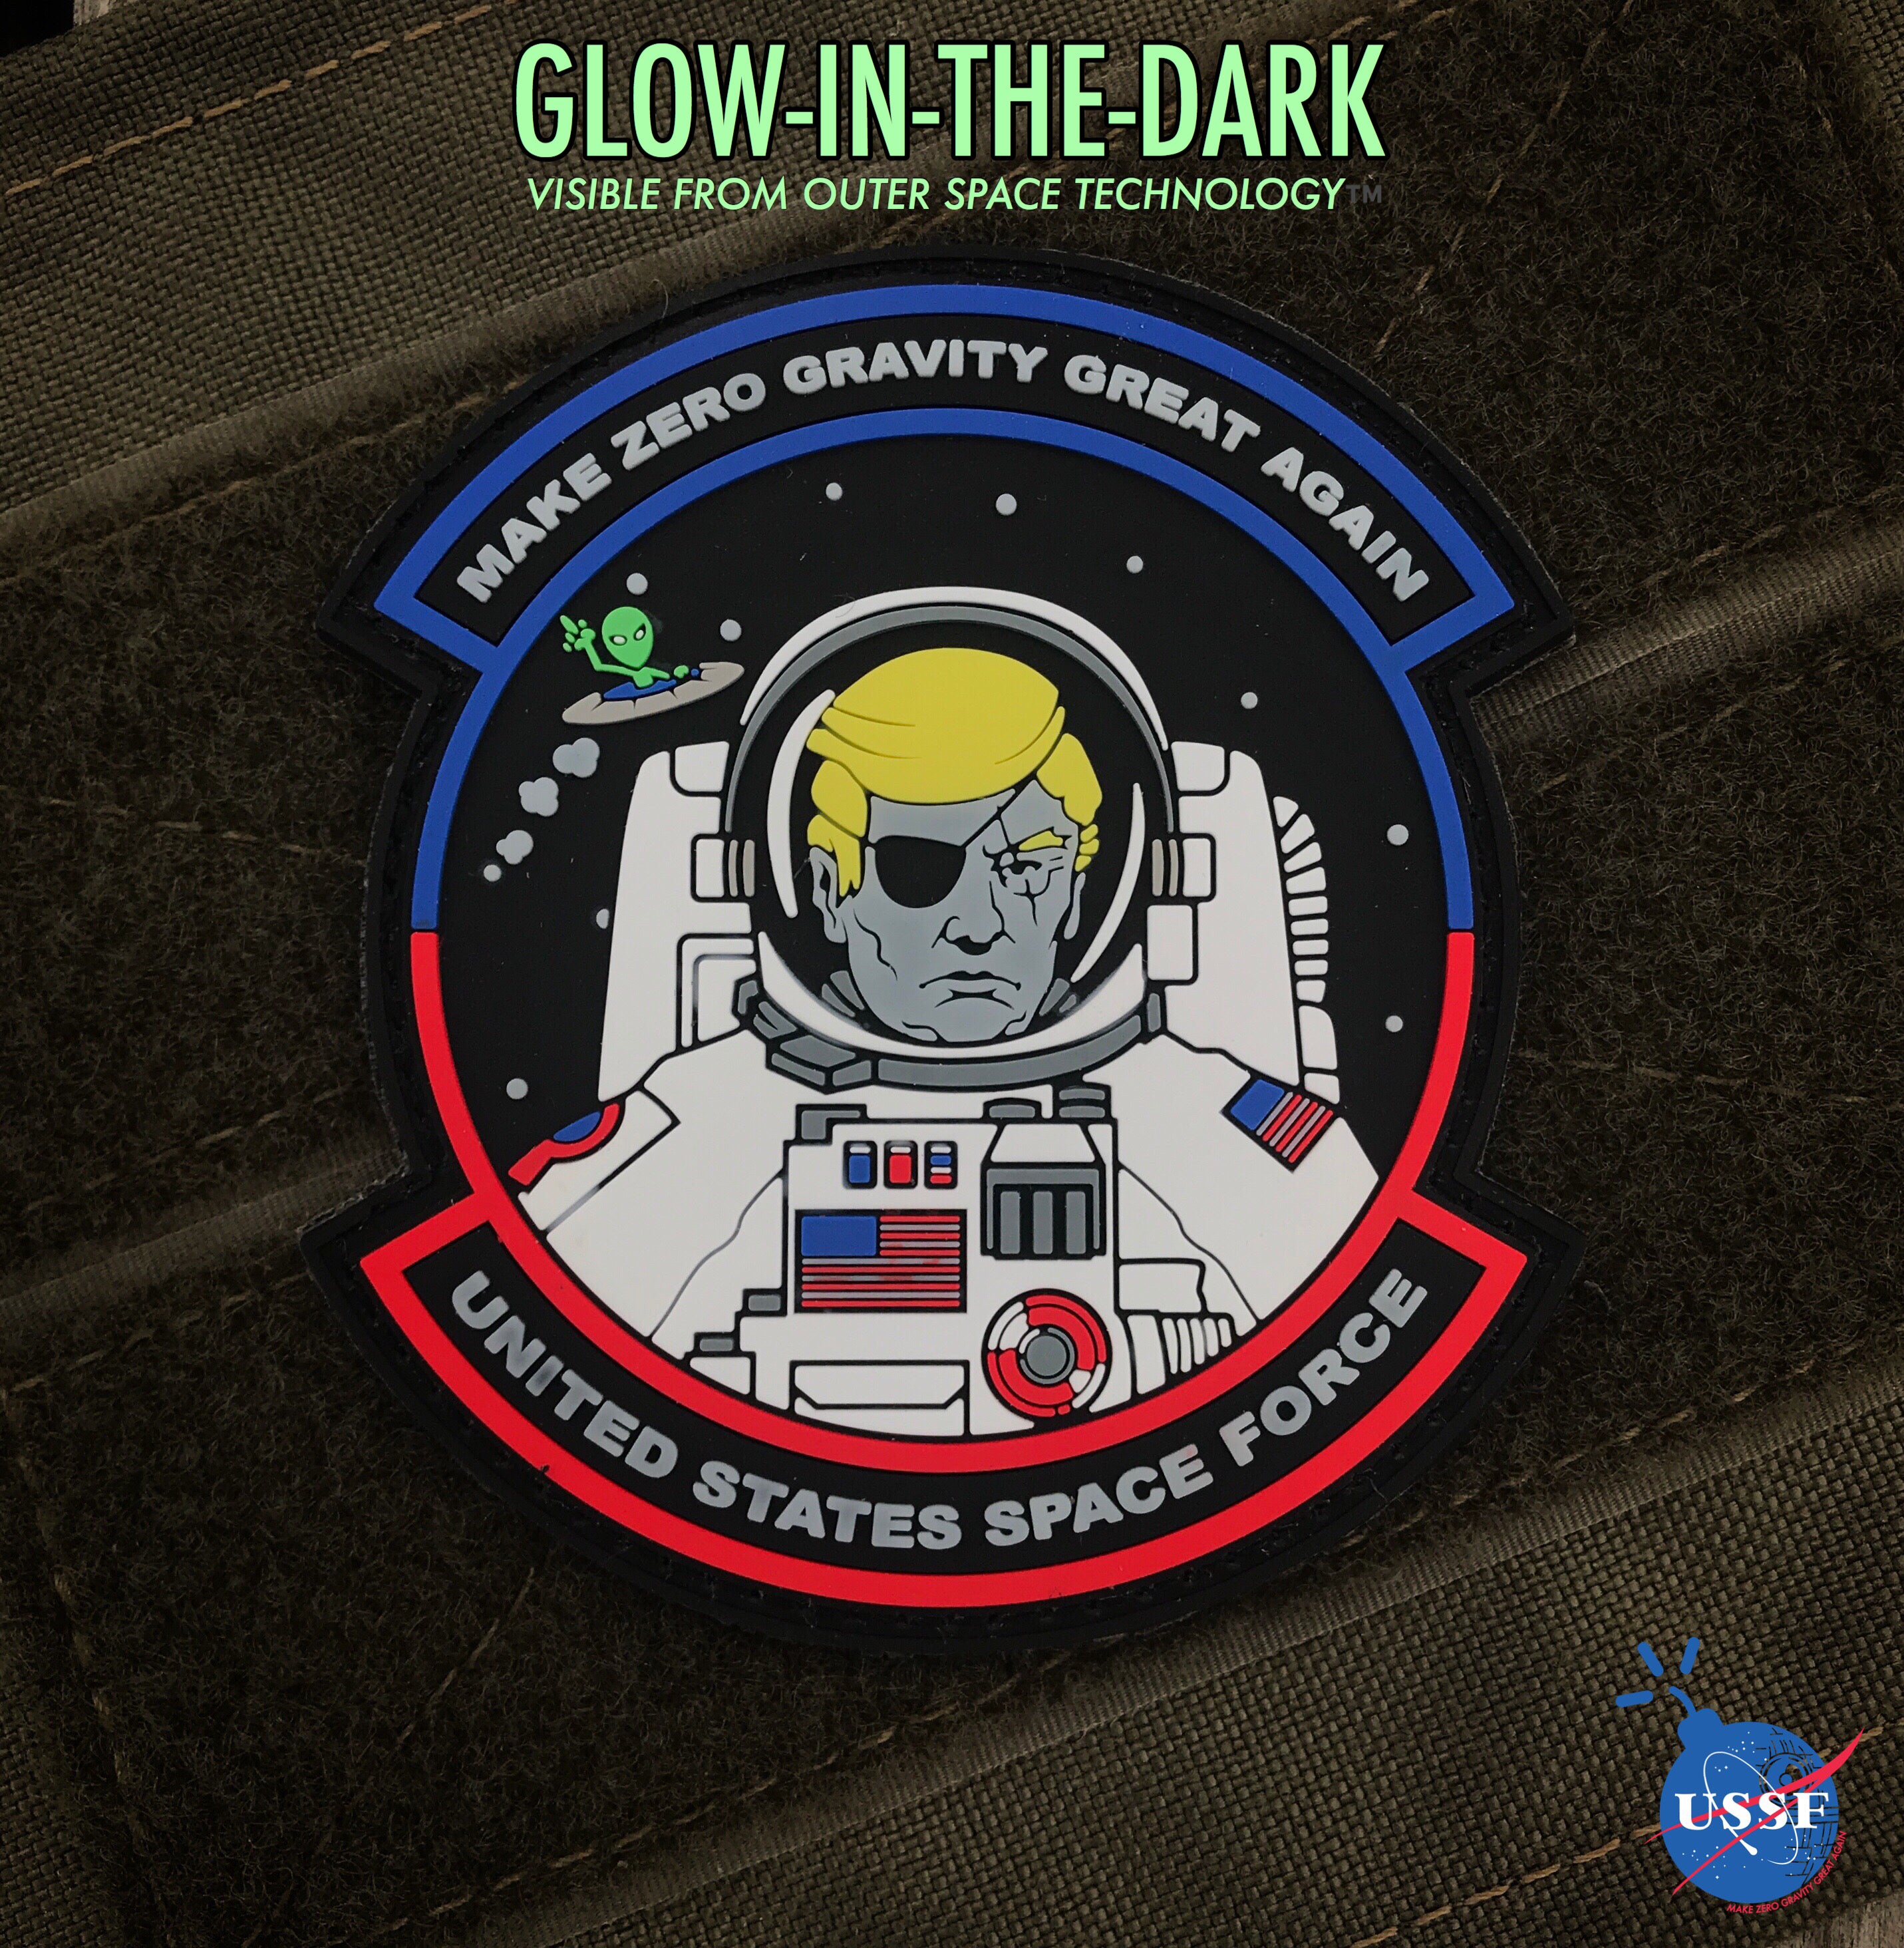 Dangerous Goods™️ Donald Trump USSF Space Force 3D PVC Morale Patch - Glow In The Dark